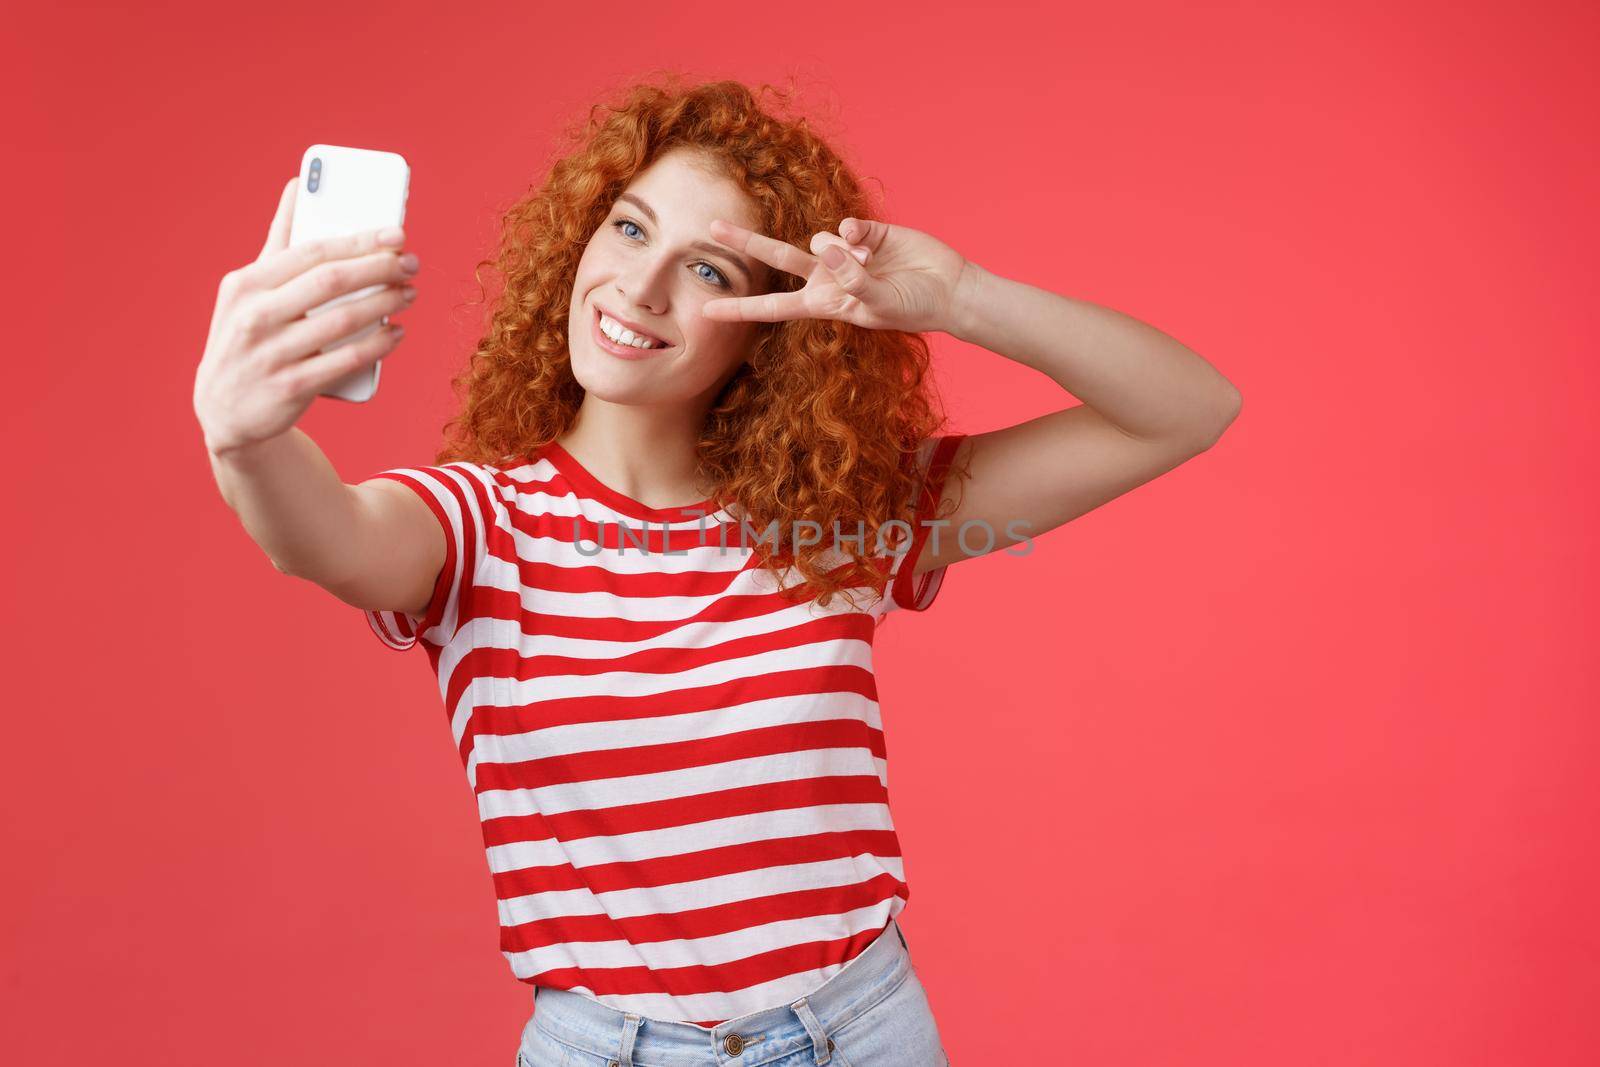 Hey followers how your summer holidays. Cheerful self-assured stylish fashionable redhead curly girl strike pose show peace victory gesture look smartphone screen taking selfie red background.